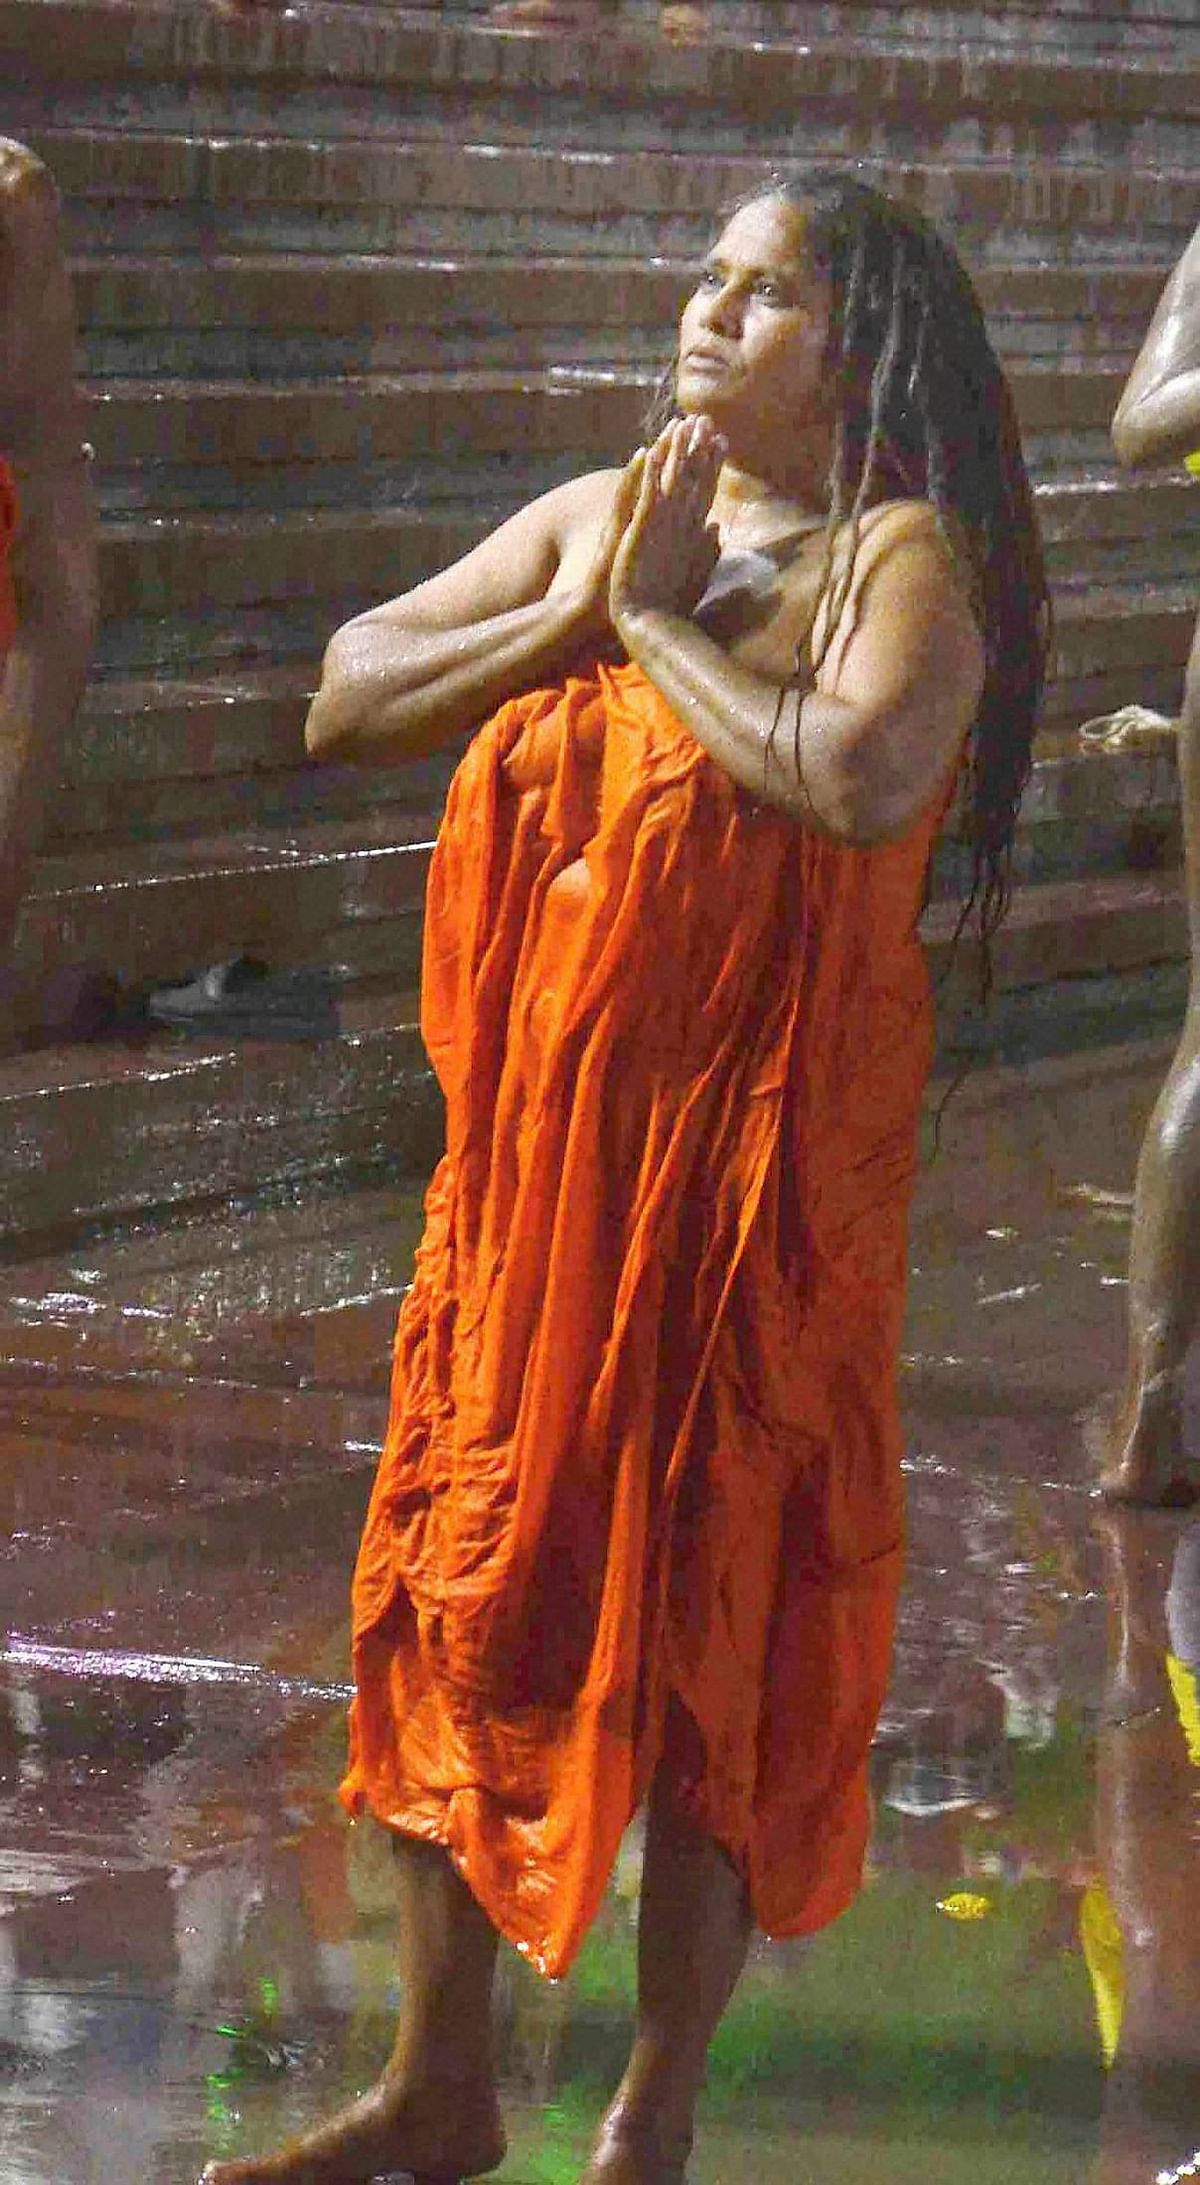 

The snan began in the wee hours with devotees venturing into the holy Kshipra chanting “Har Har Mahadev”. 